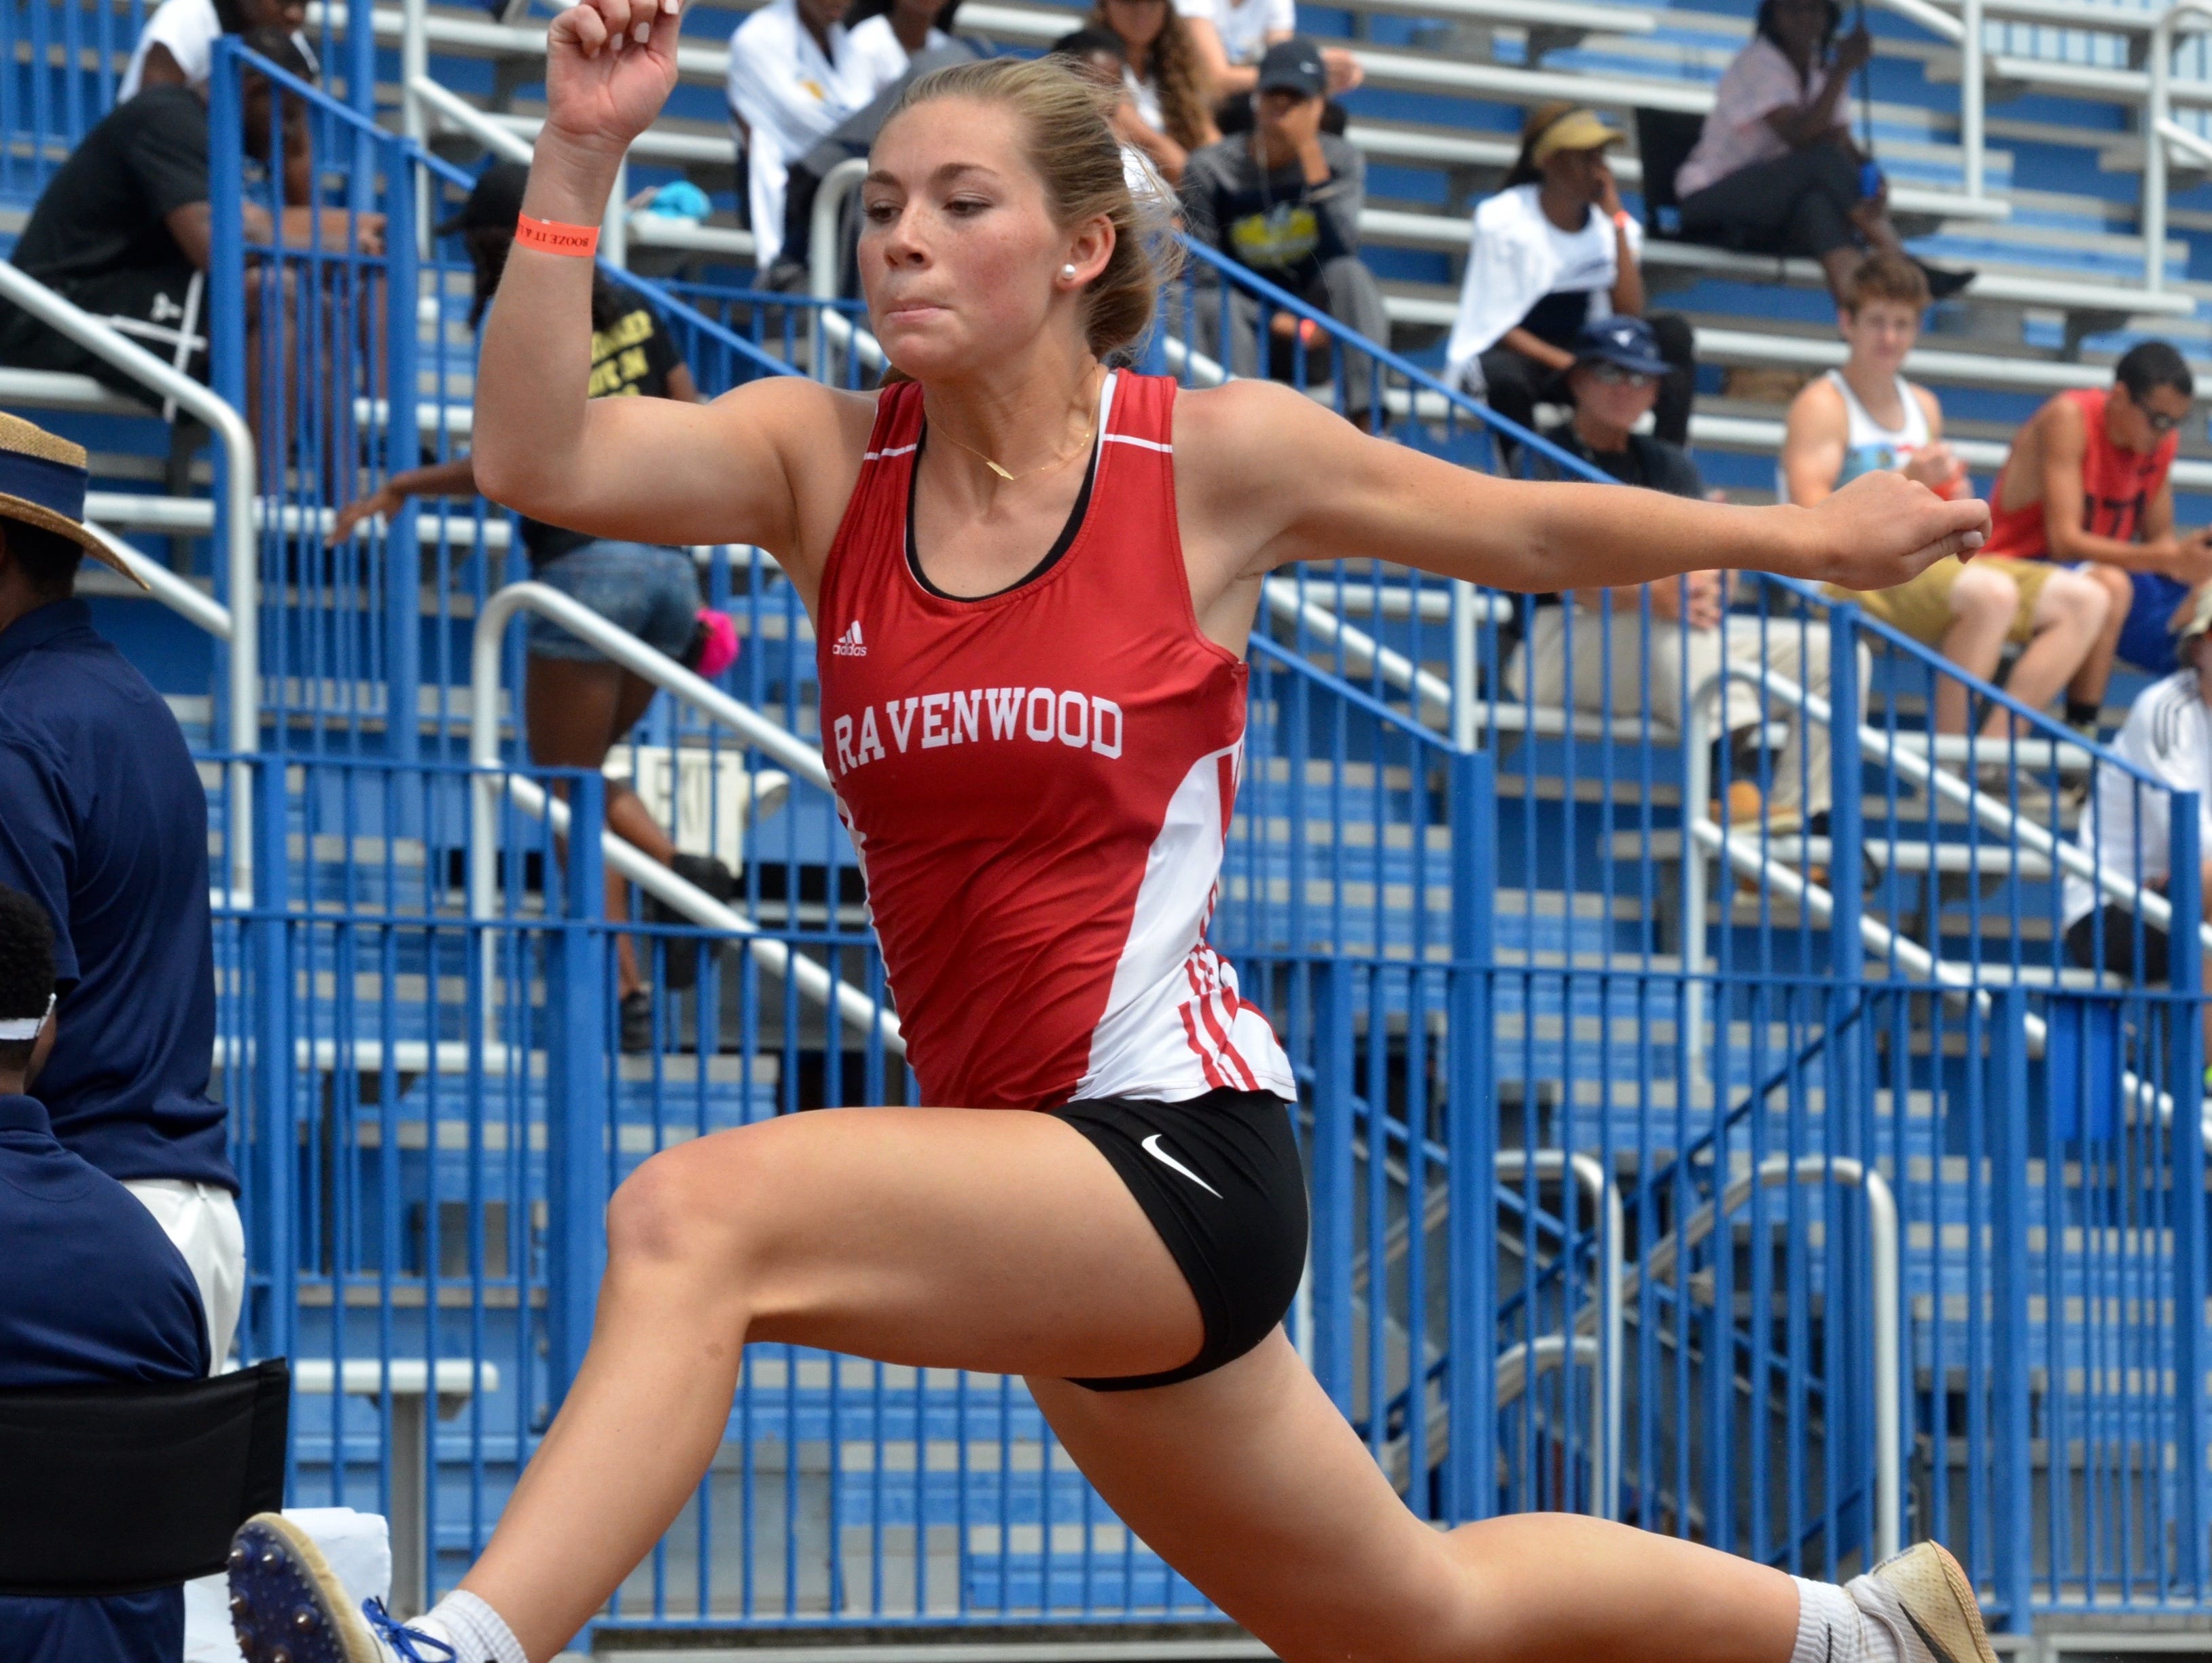 Ravenwood's Sarah Klippenstein competes in the Class AAA triple jump during Thursday's TSSAA State Track Championships at MTSU's Dean A. Hayes Stadium.